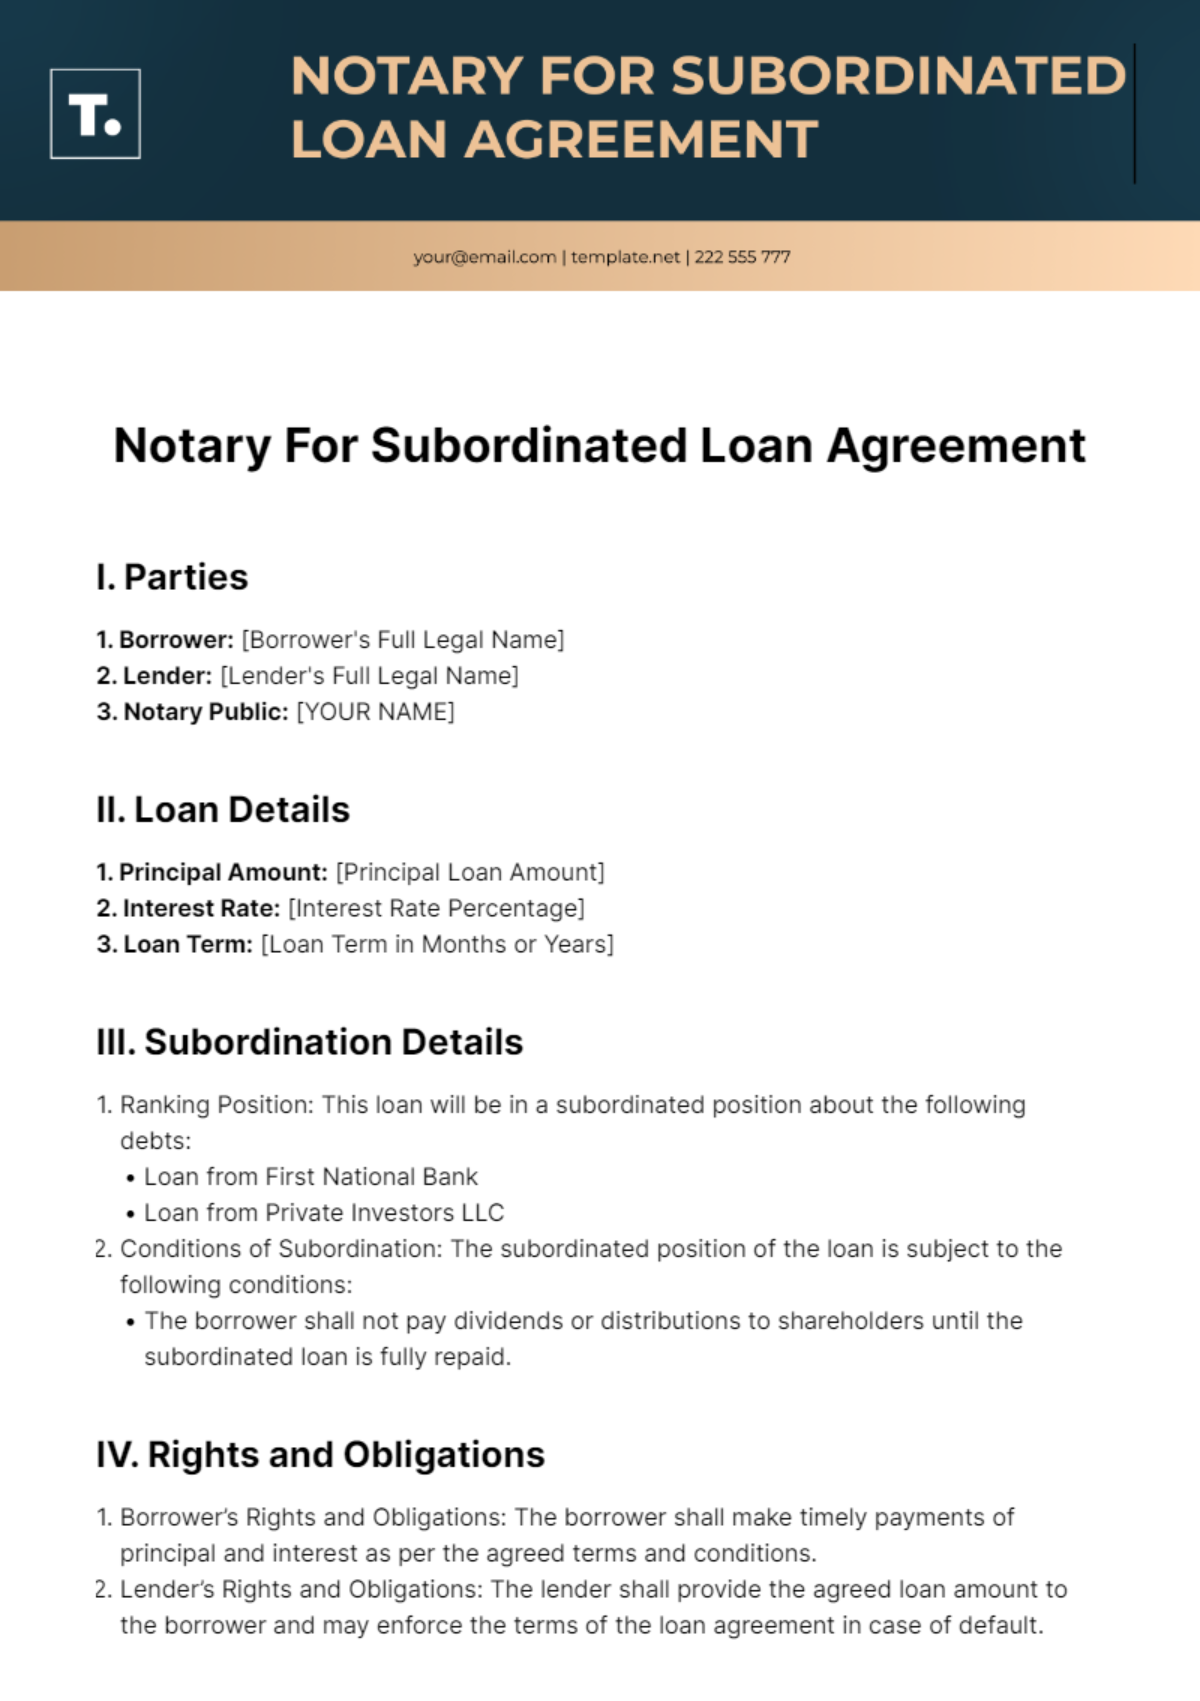 Notary For Subordinated Loan Agreement Template